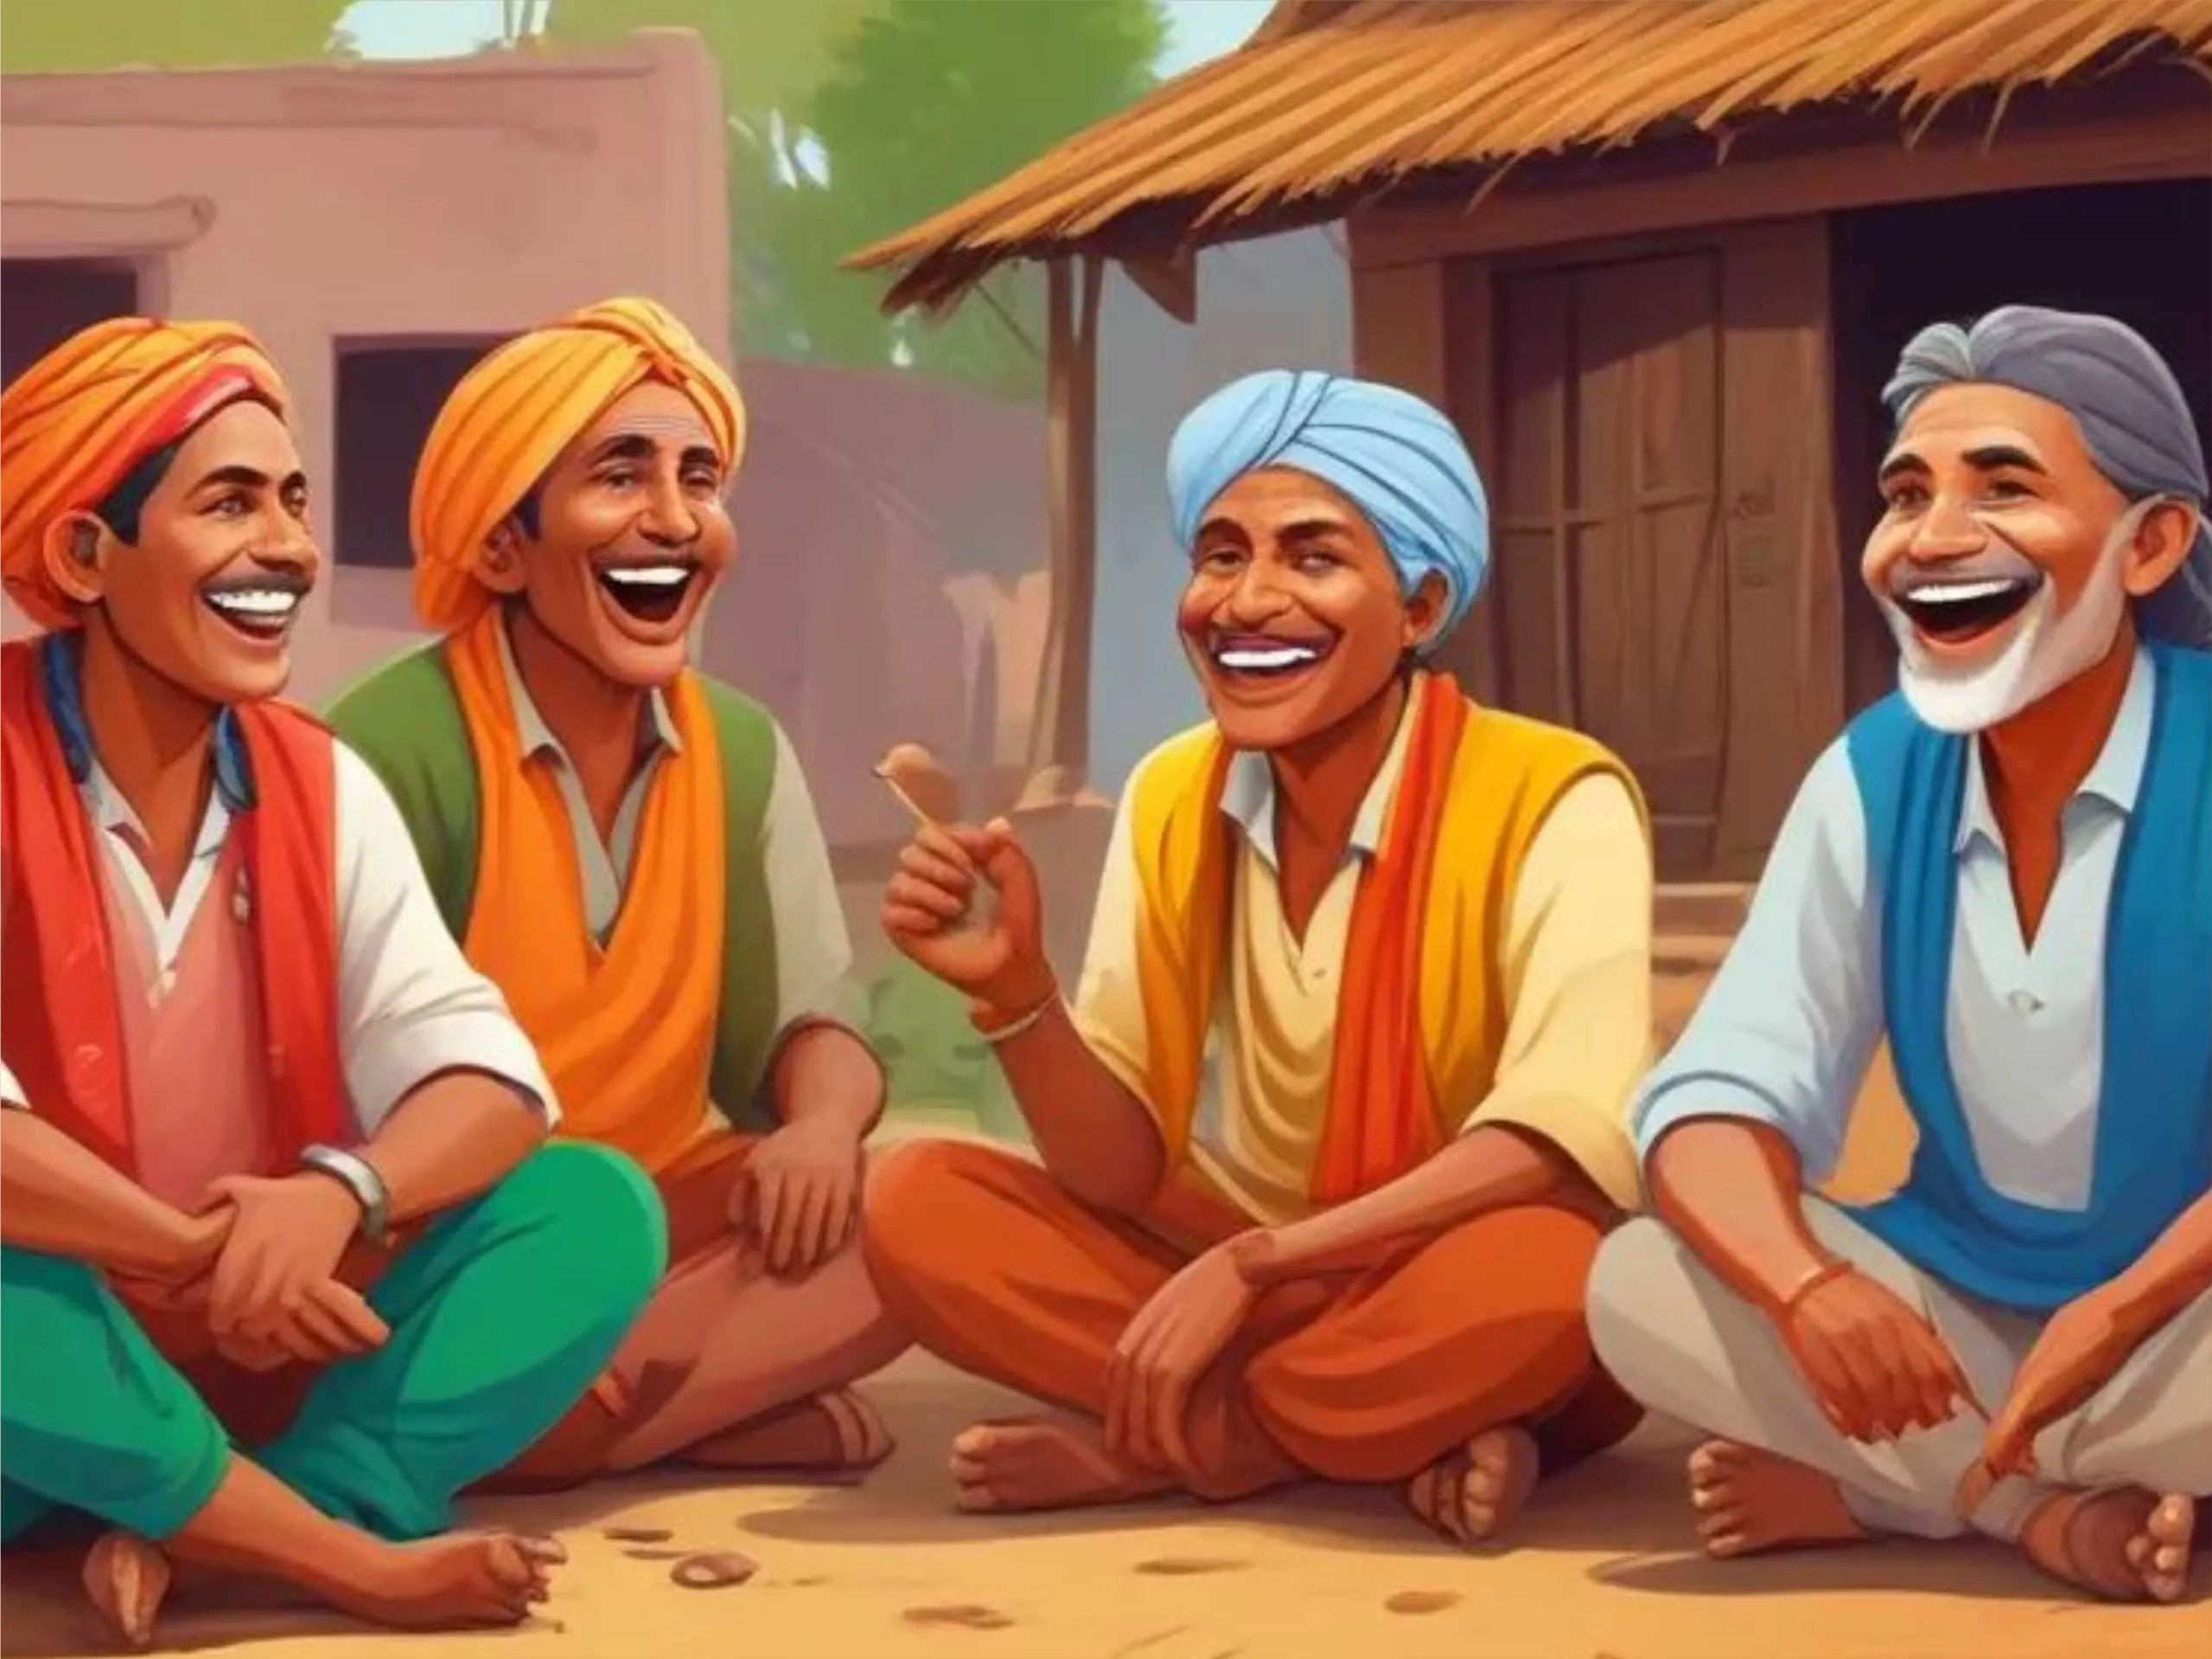 cartoon image of Indian farmers talking and laughing